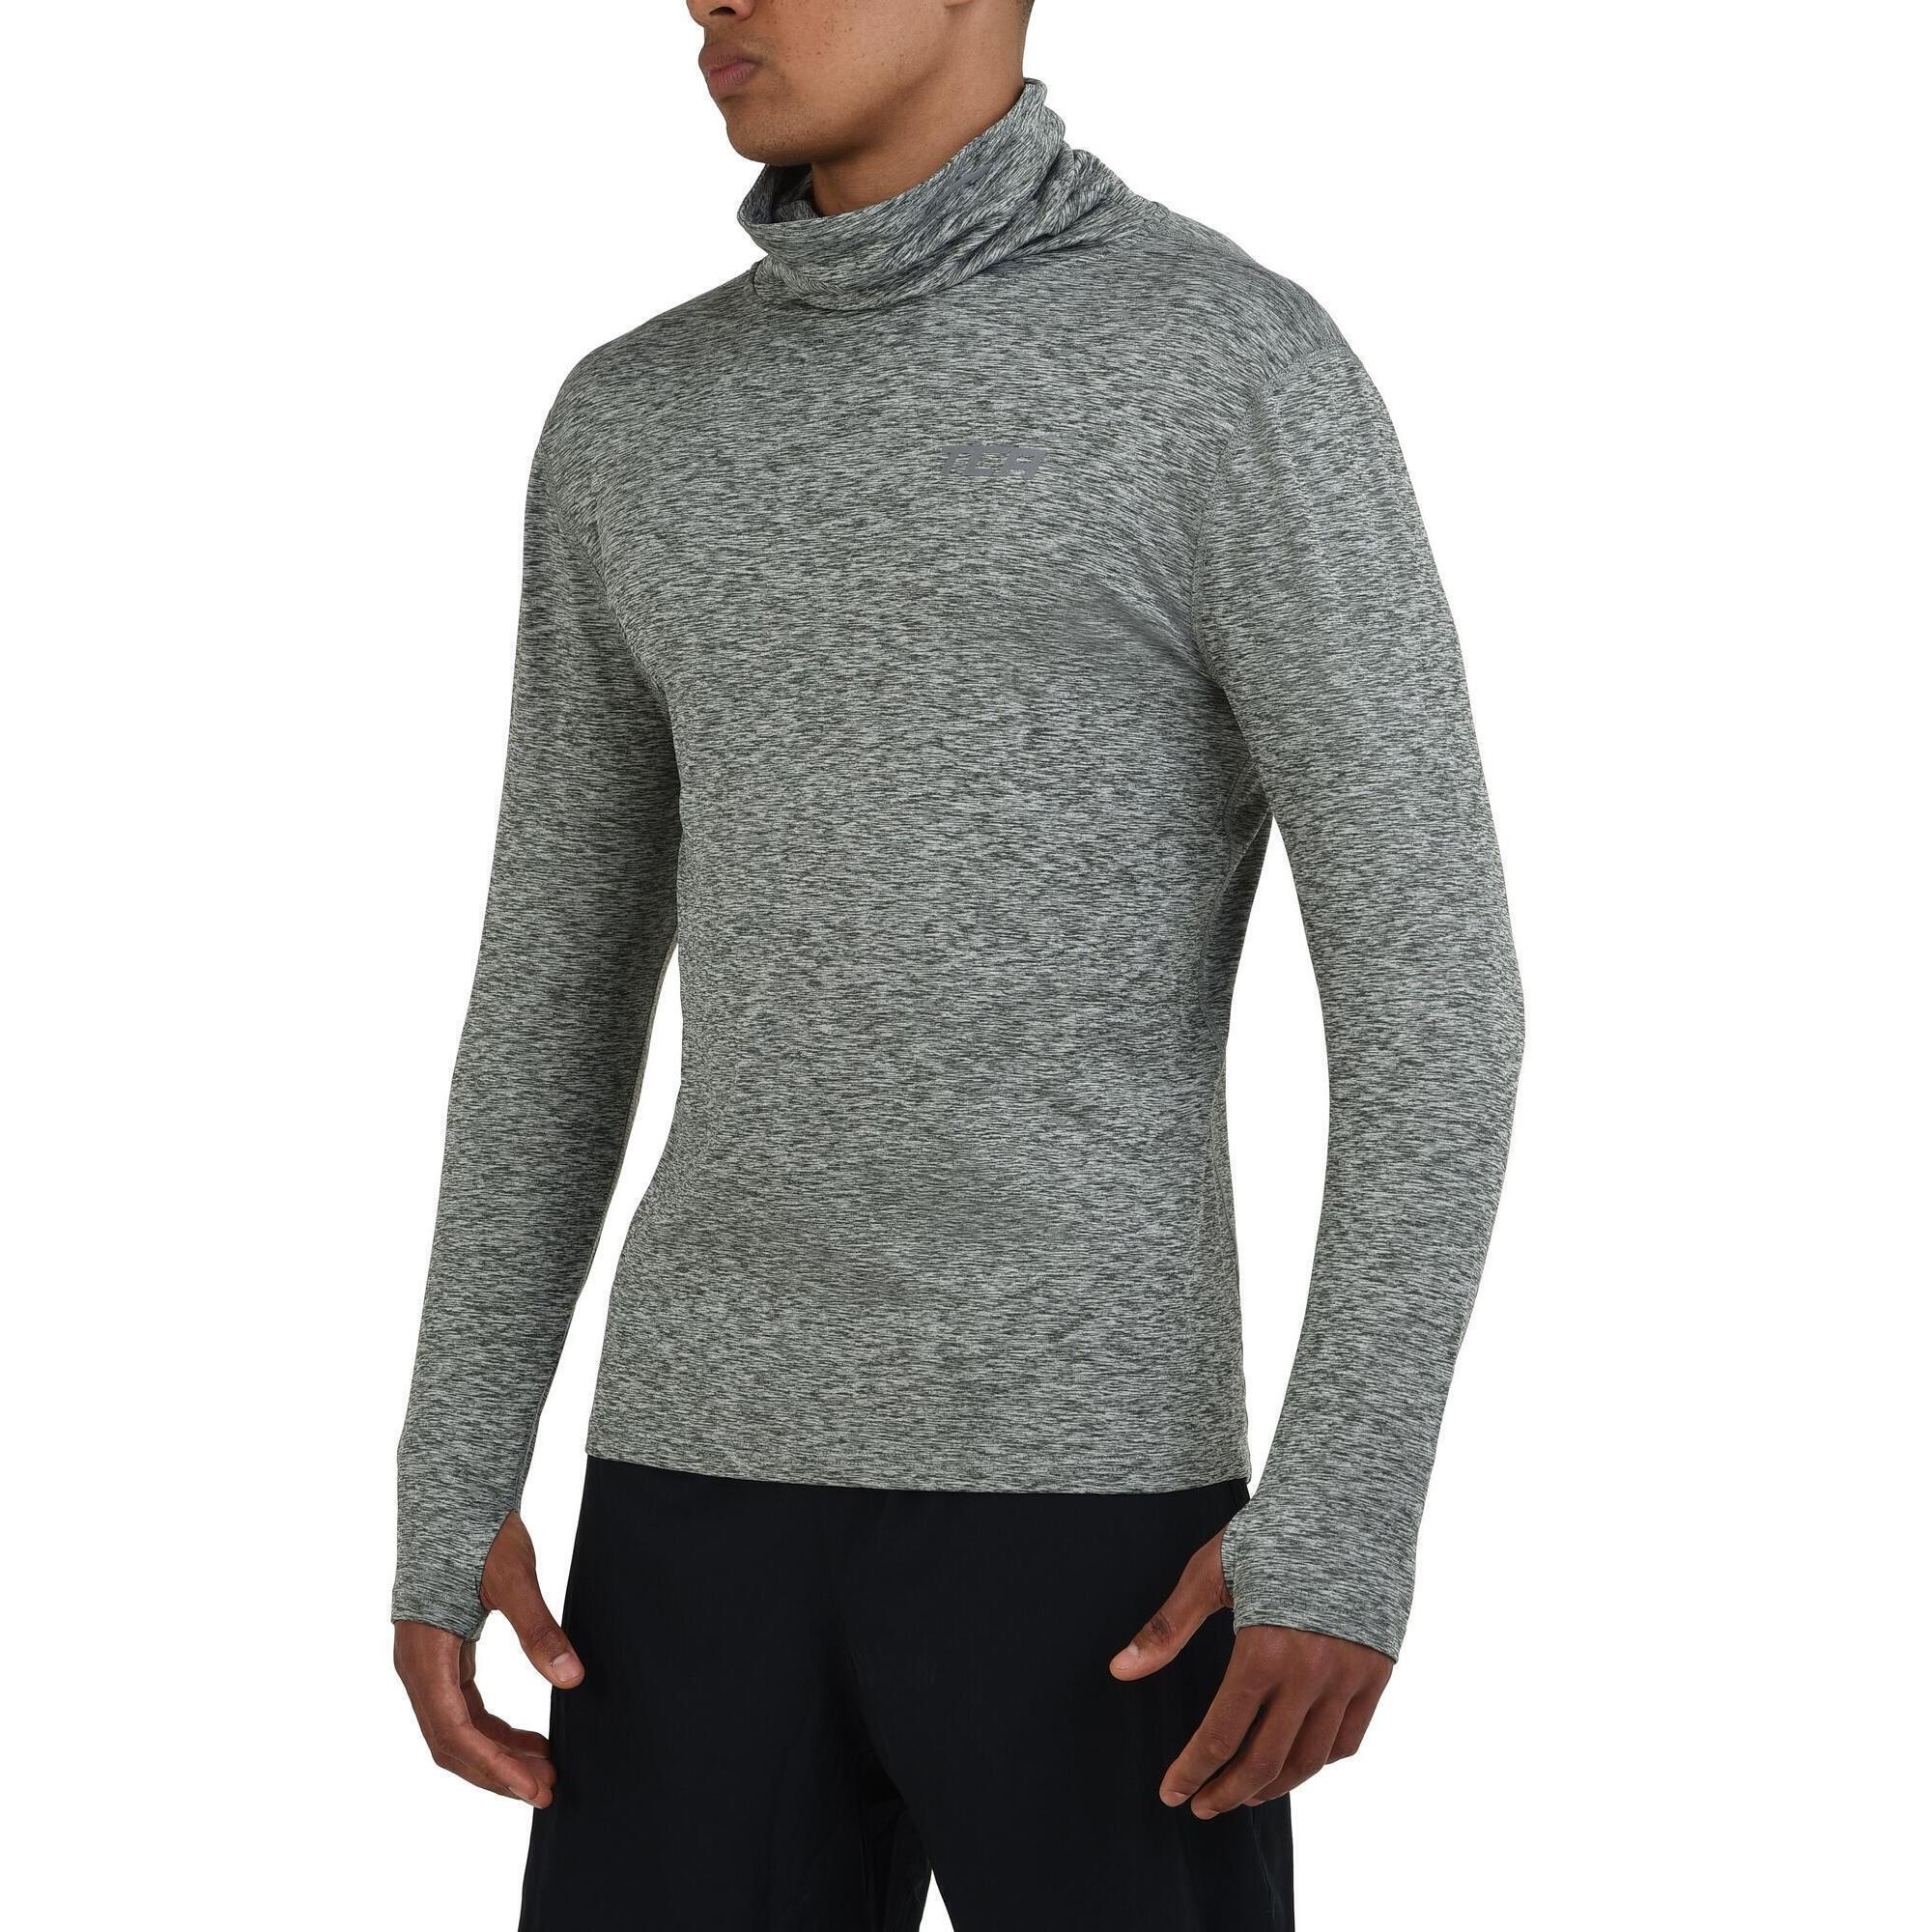 TCA Men’s Thermal Funnel Neck Top - Quiet Shade Marl